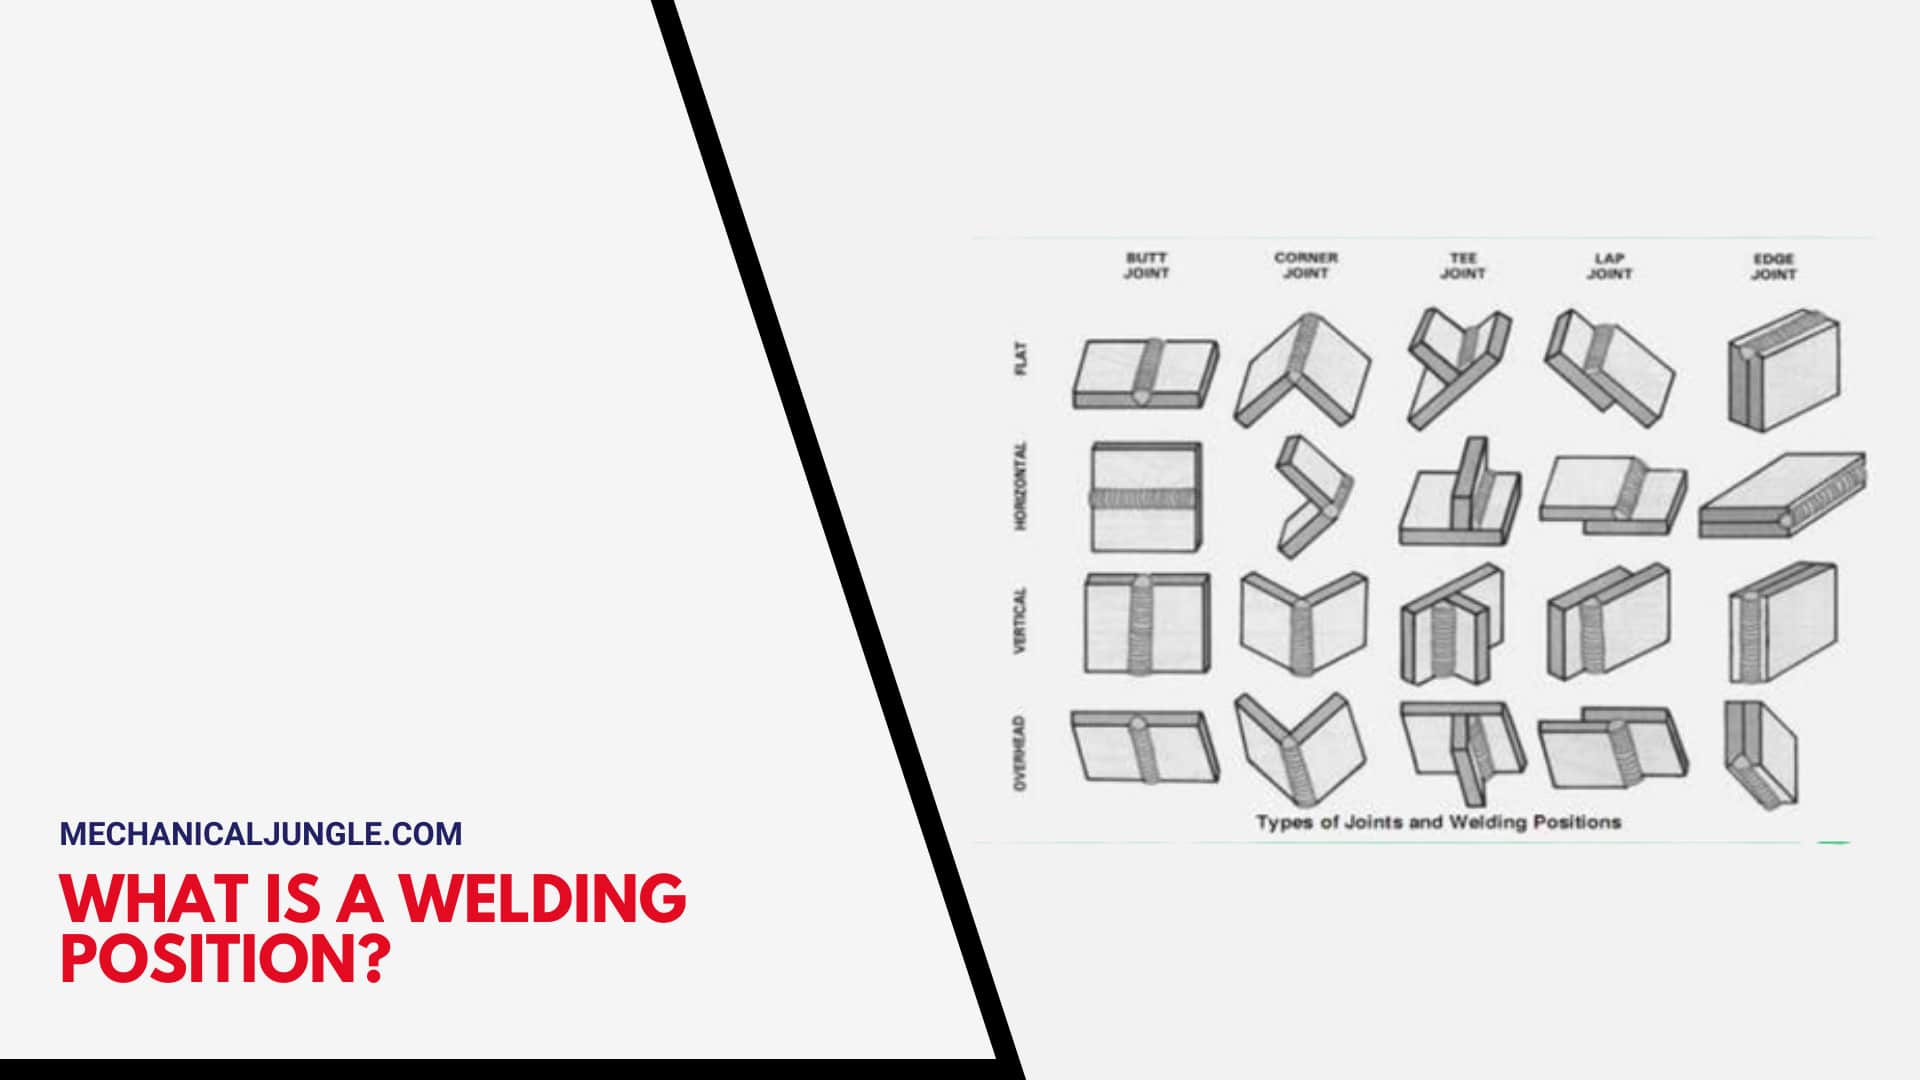 What Is a Welding Position?